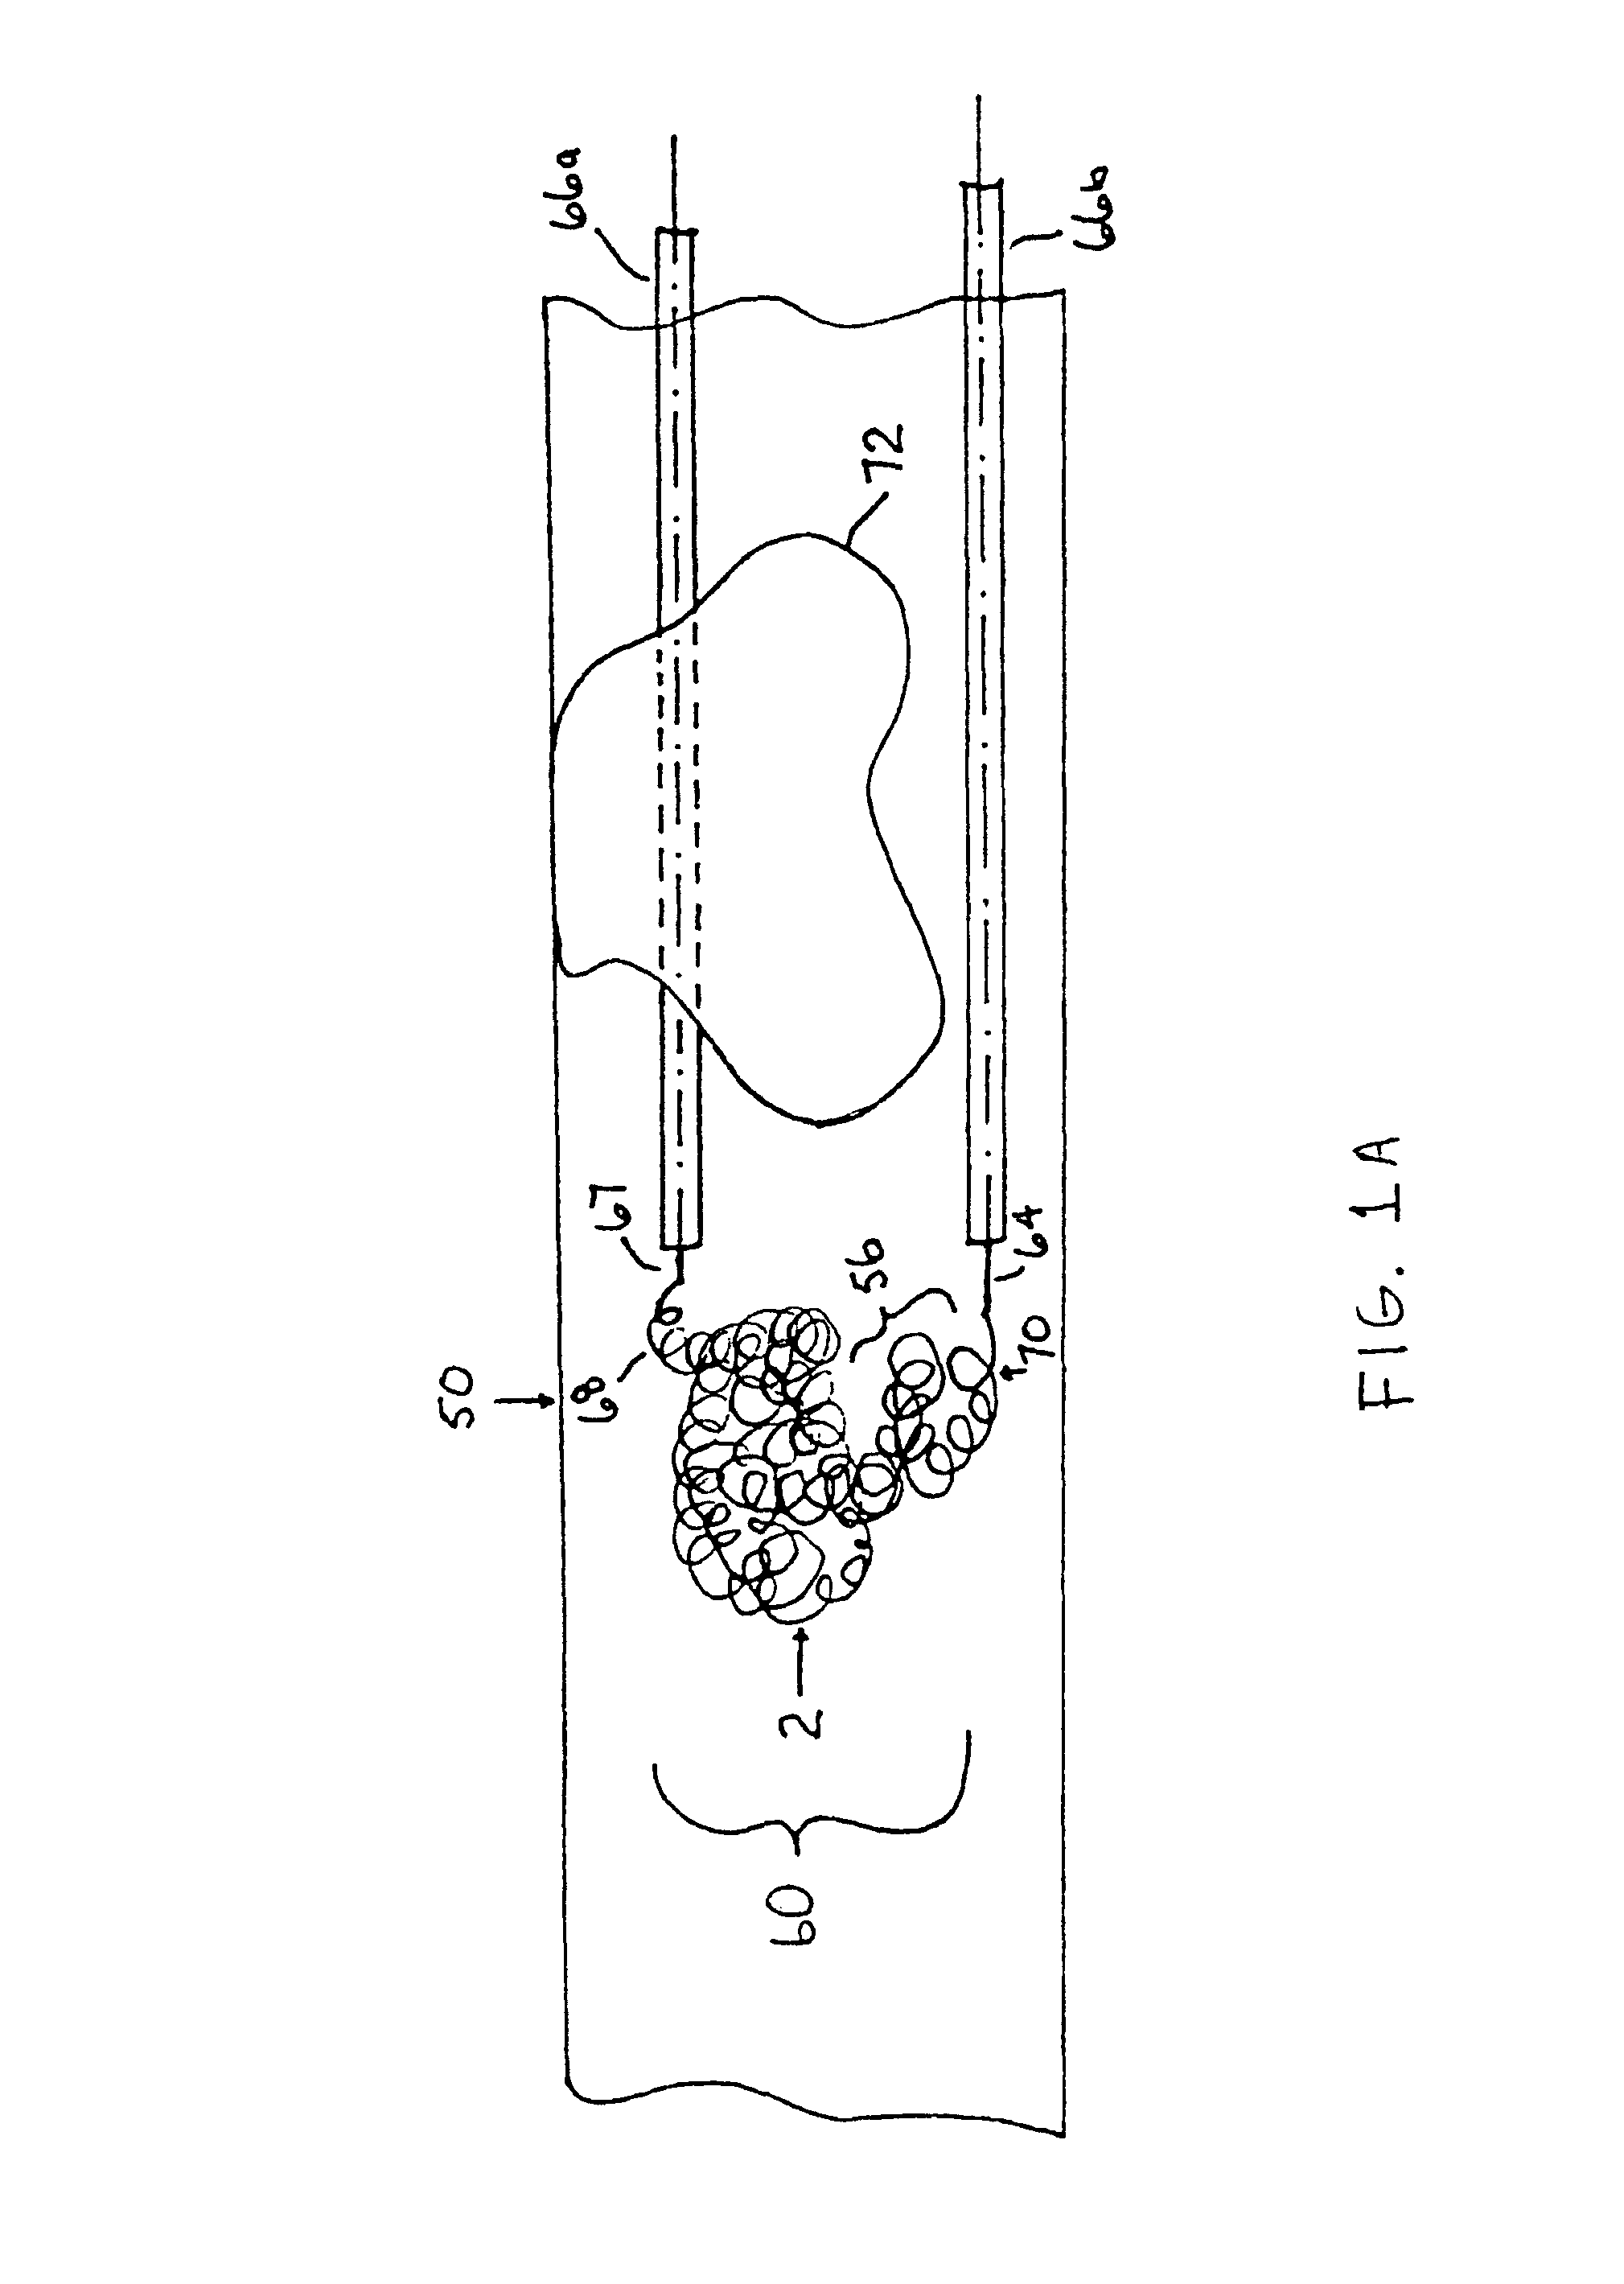 Thrombus removal system and process